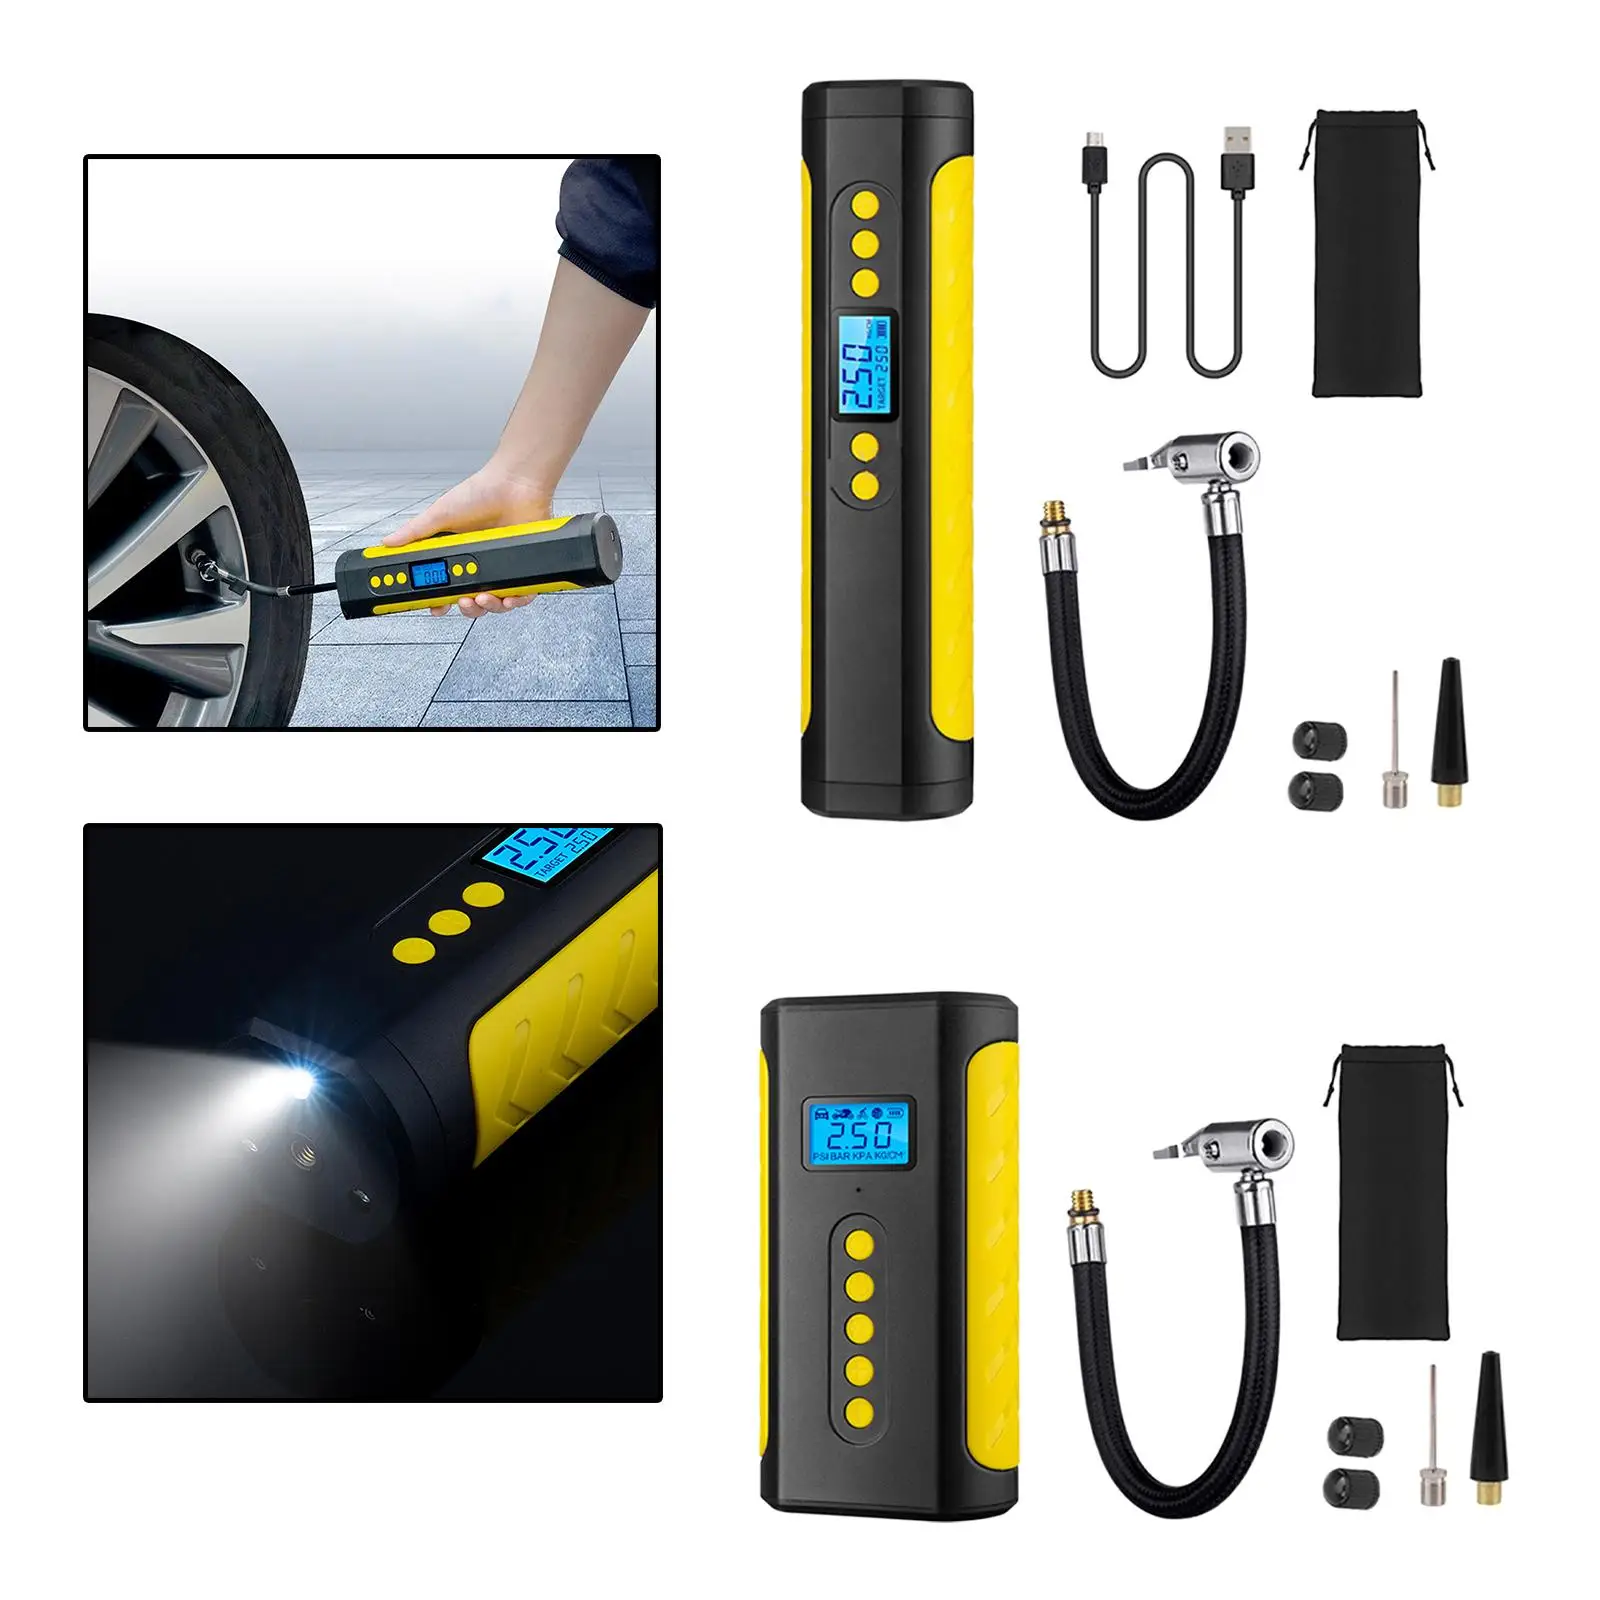 Mini Portable Air Compressor Fast Inflation with LED Light for Bicycles